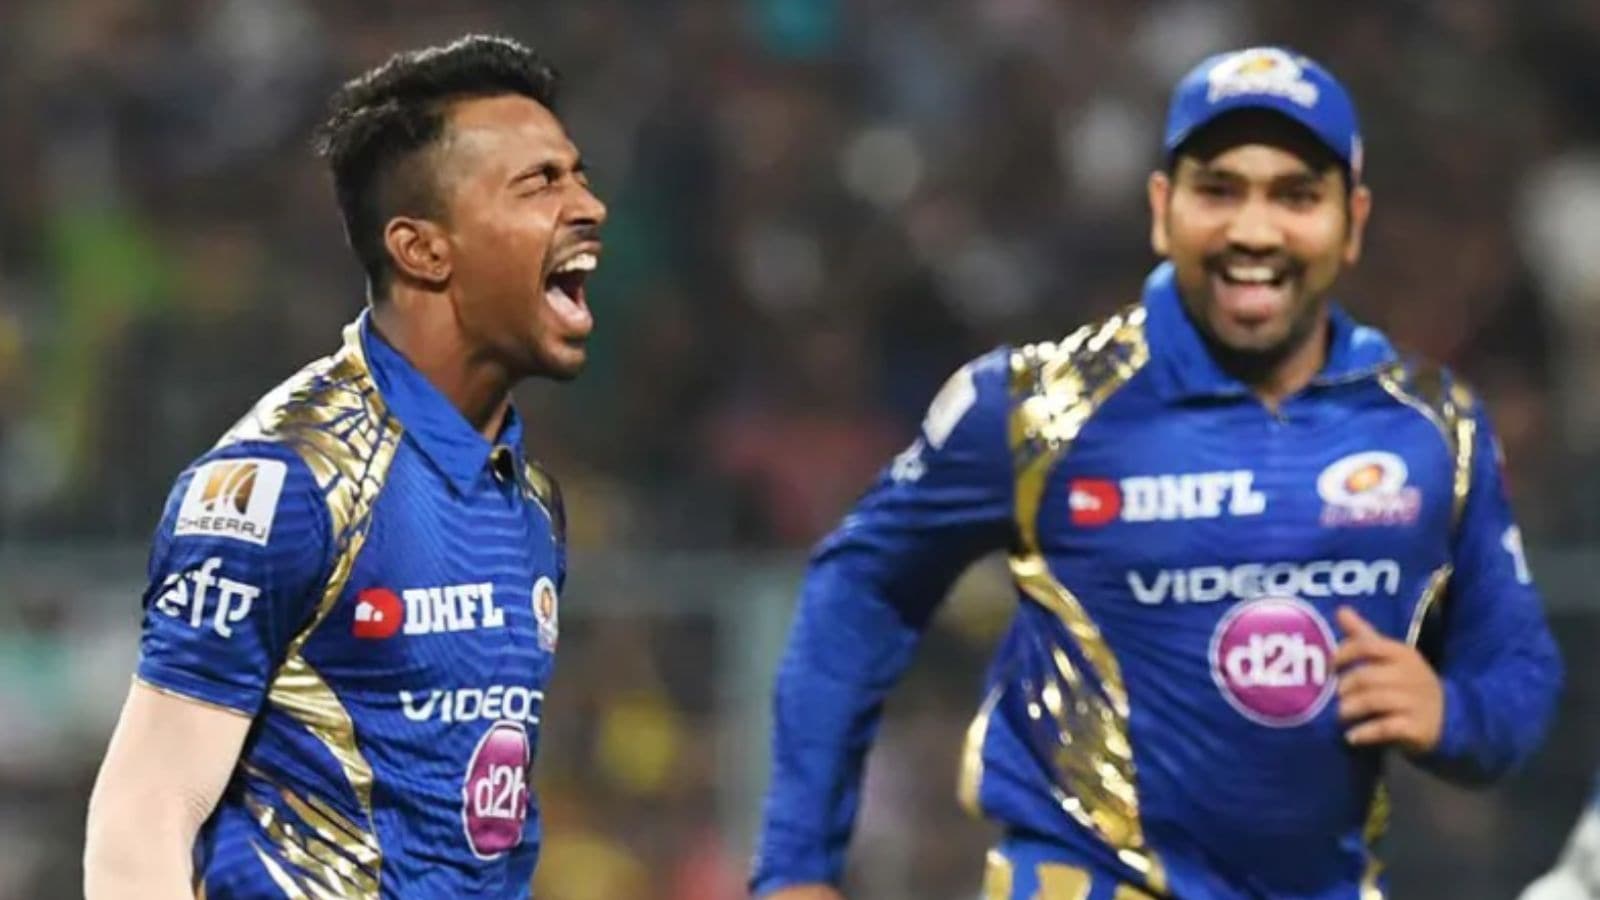 hardik pandya on his mumbai indians homecoming: ‘it has not sunk in yet, finally back where my whole cricketing journey started’